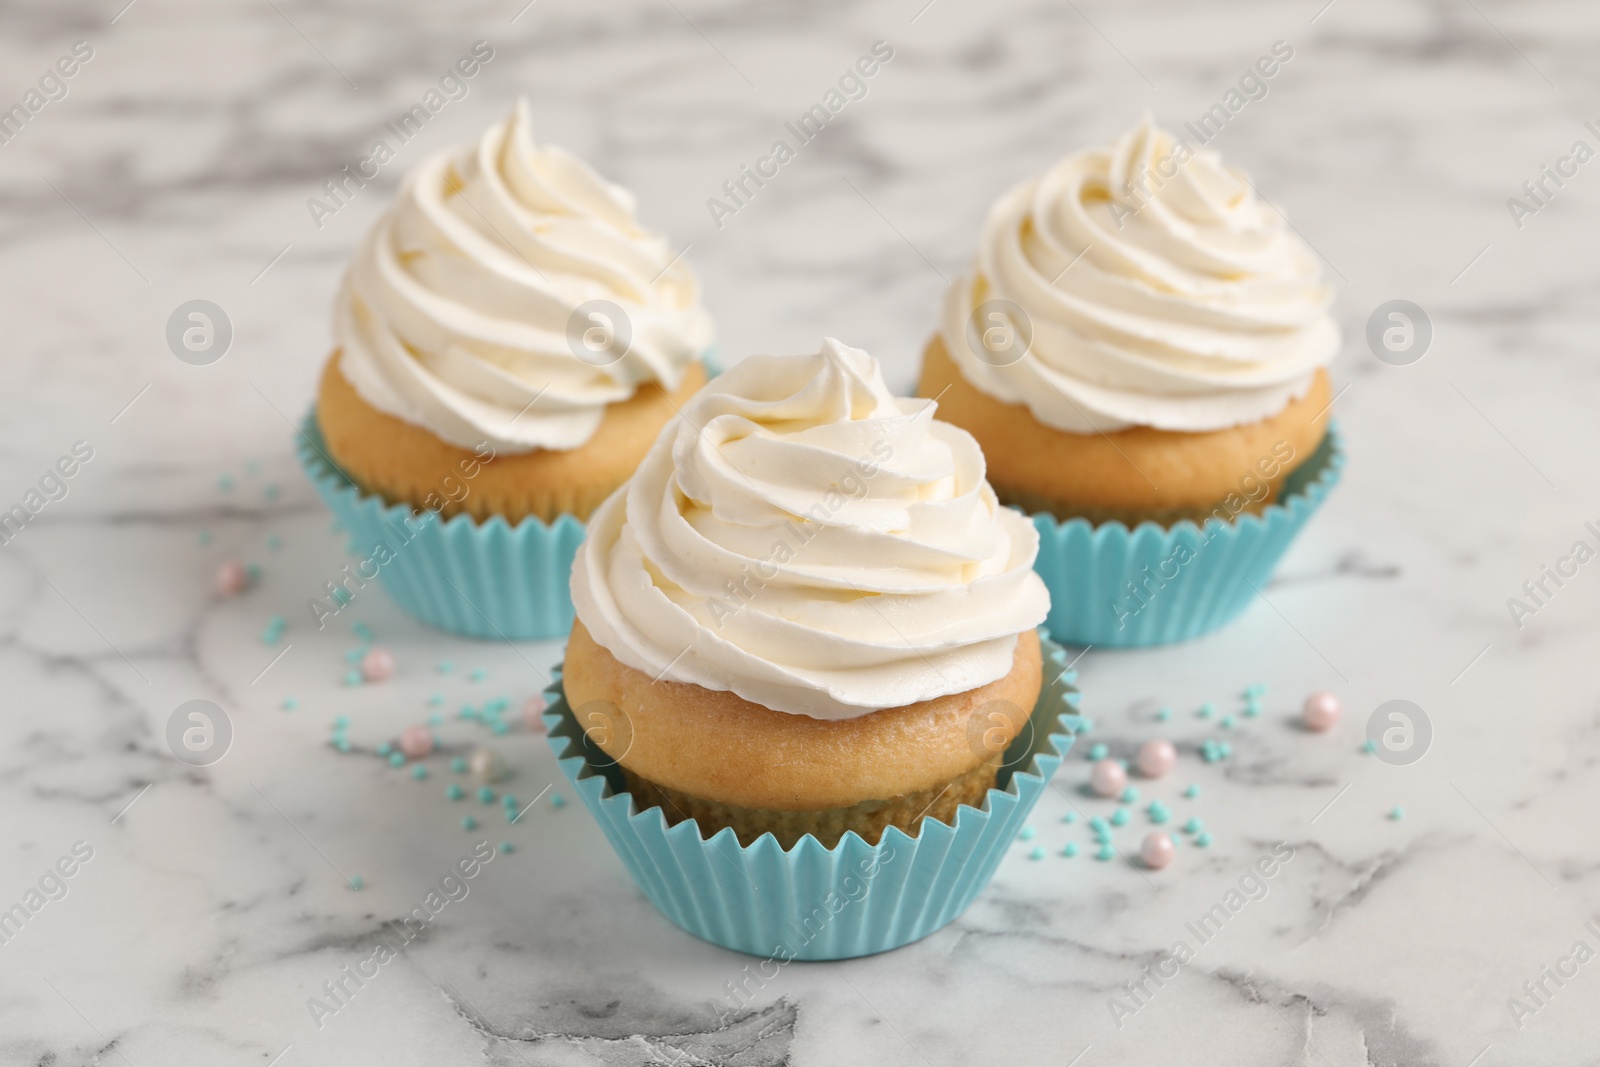 Photo of Delicious cupcakes decorated with cream on white marble table